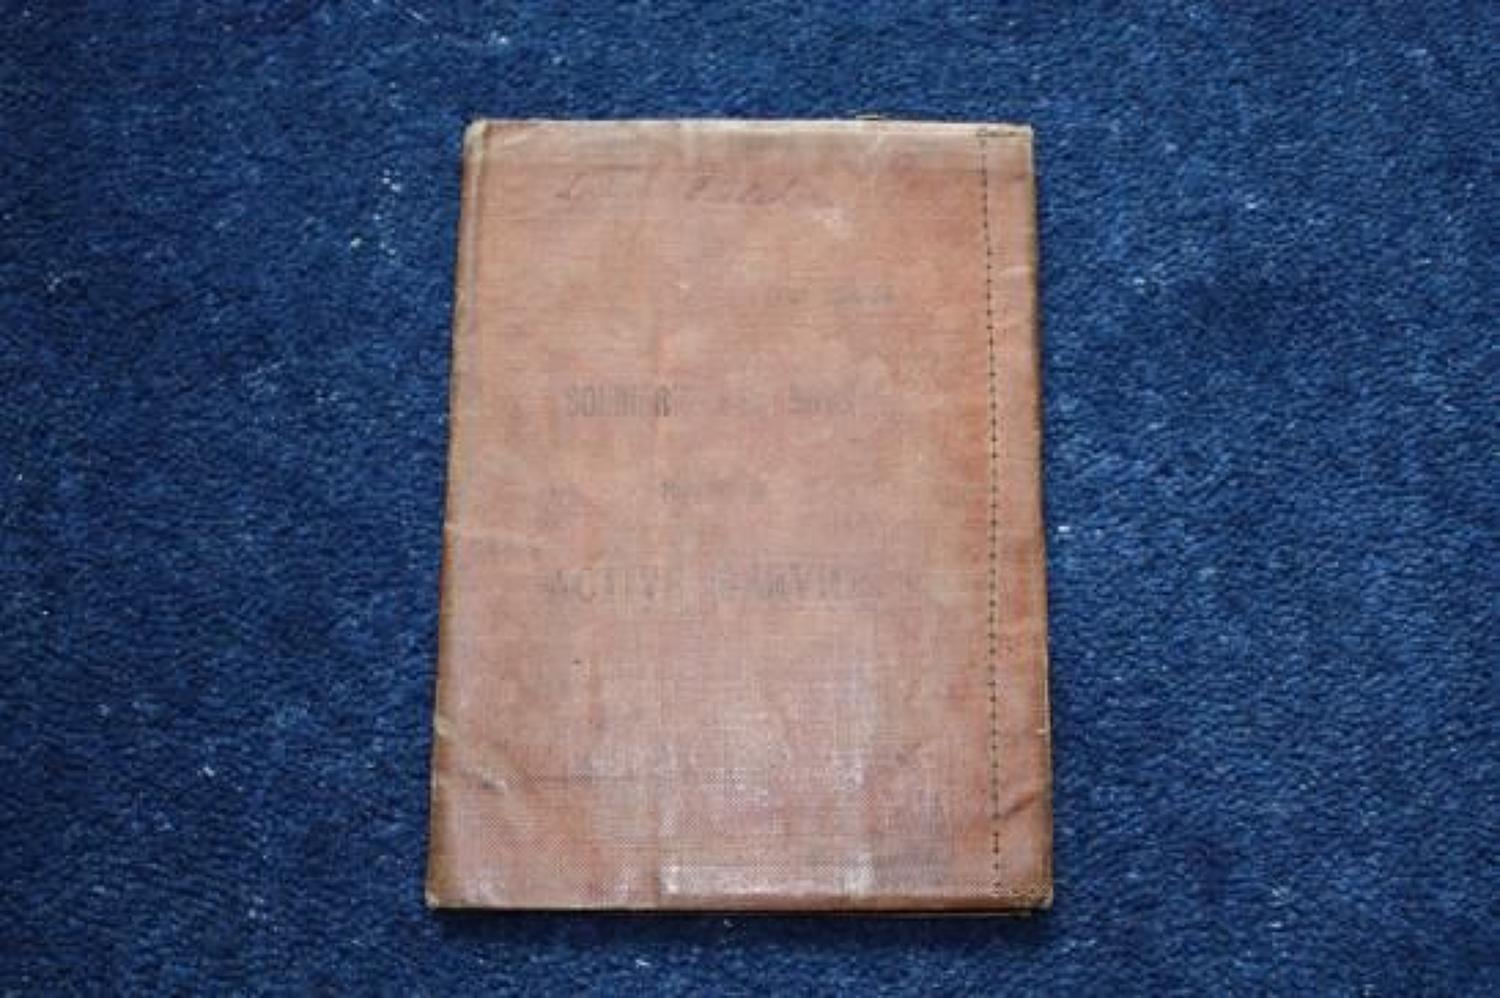 WW1 British Soldiers Pay Book: Private Fletcher, Lancashire Fusiliers.